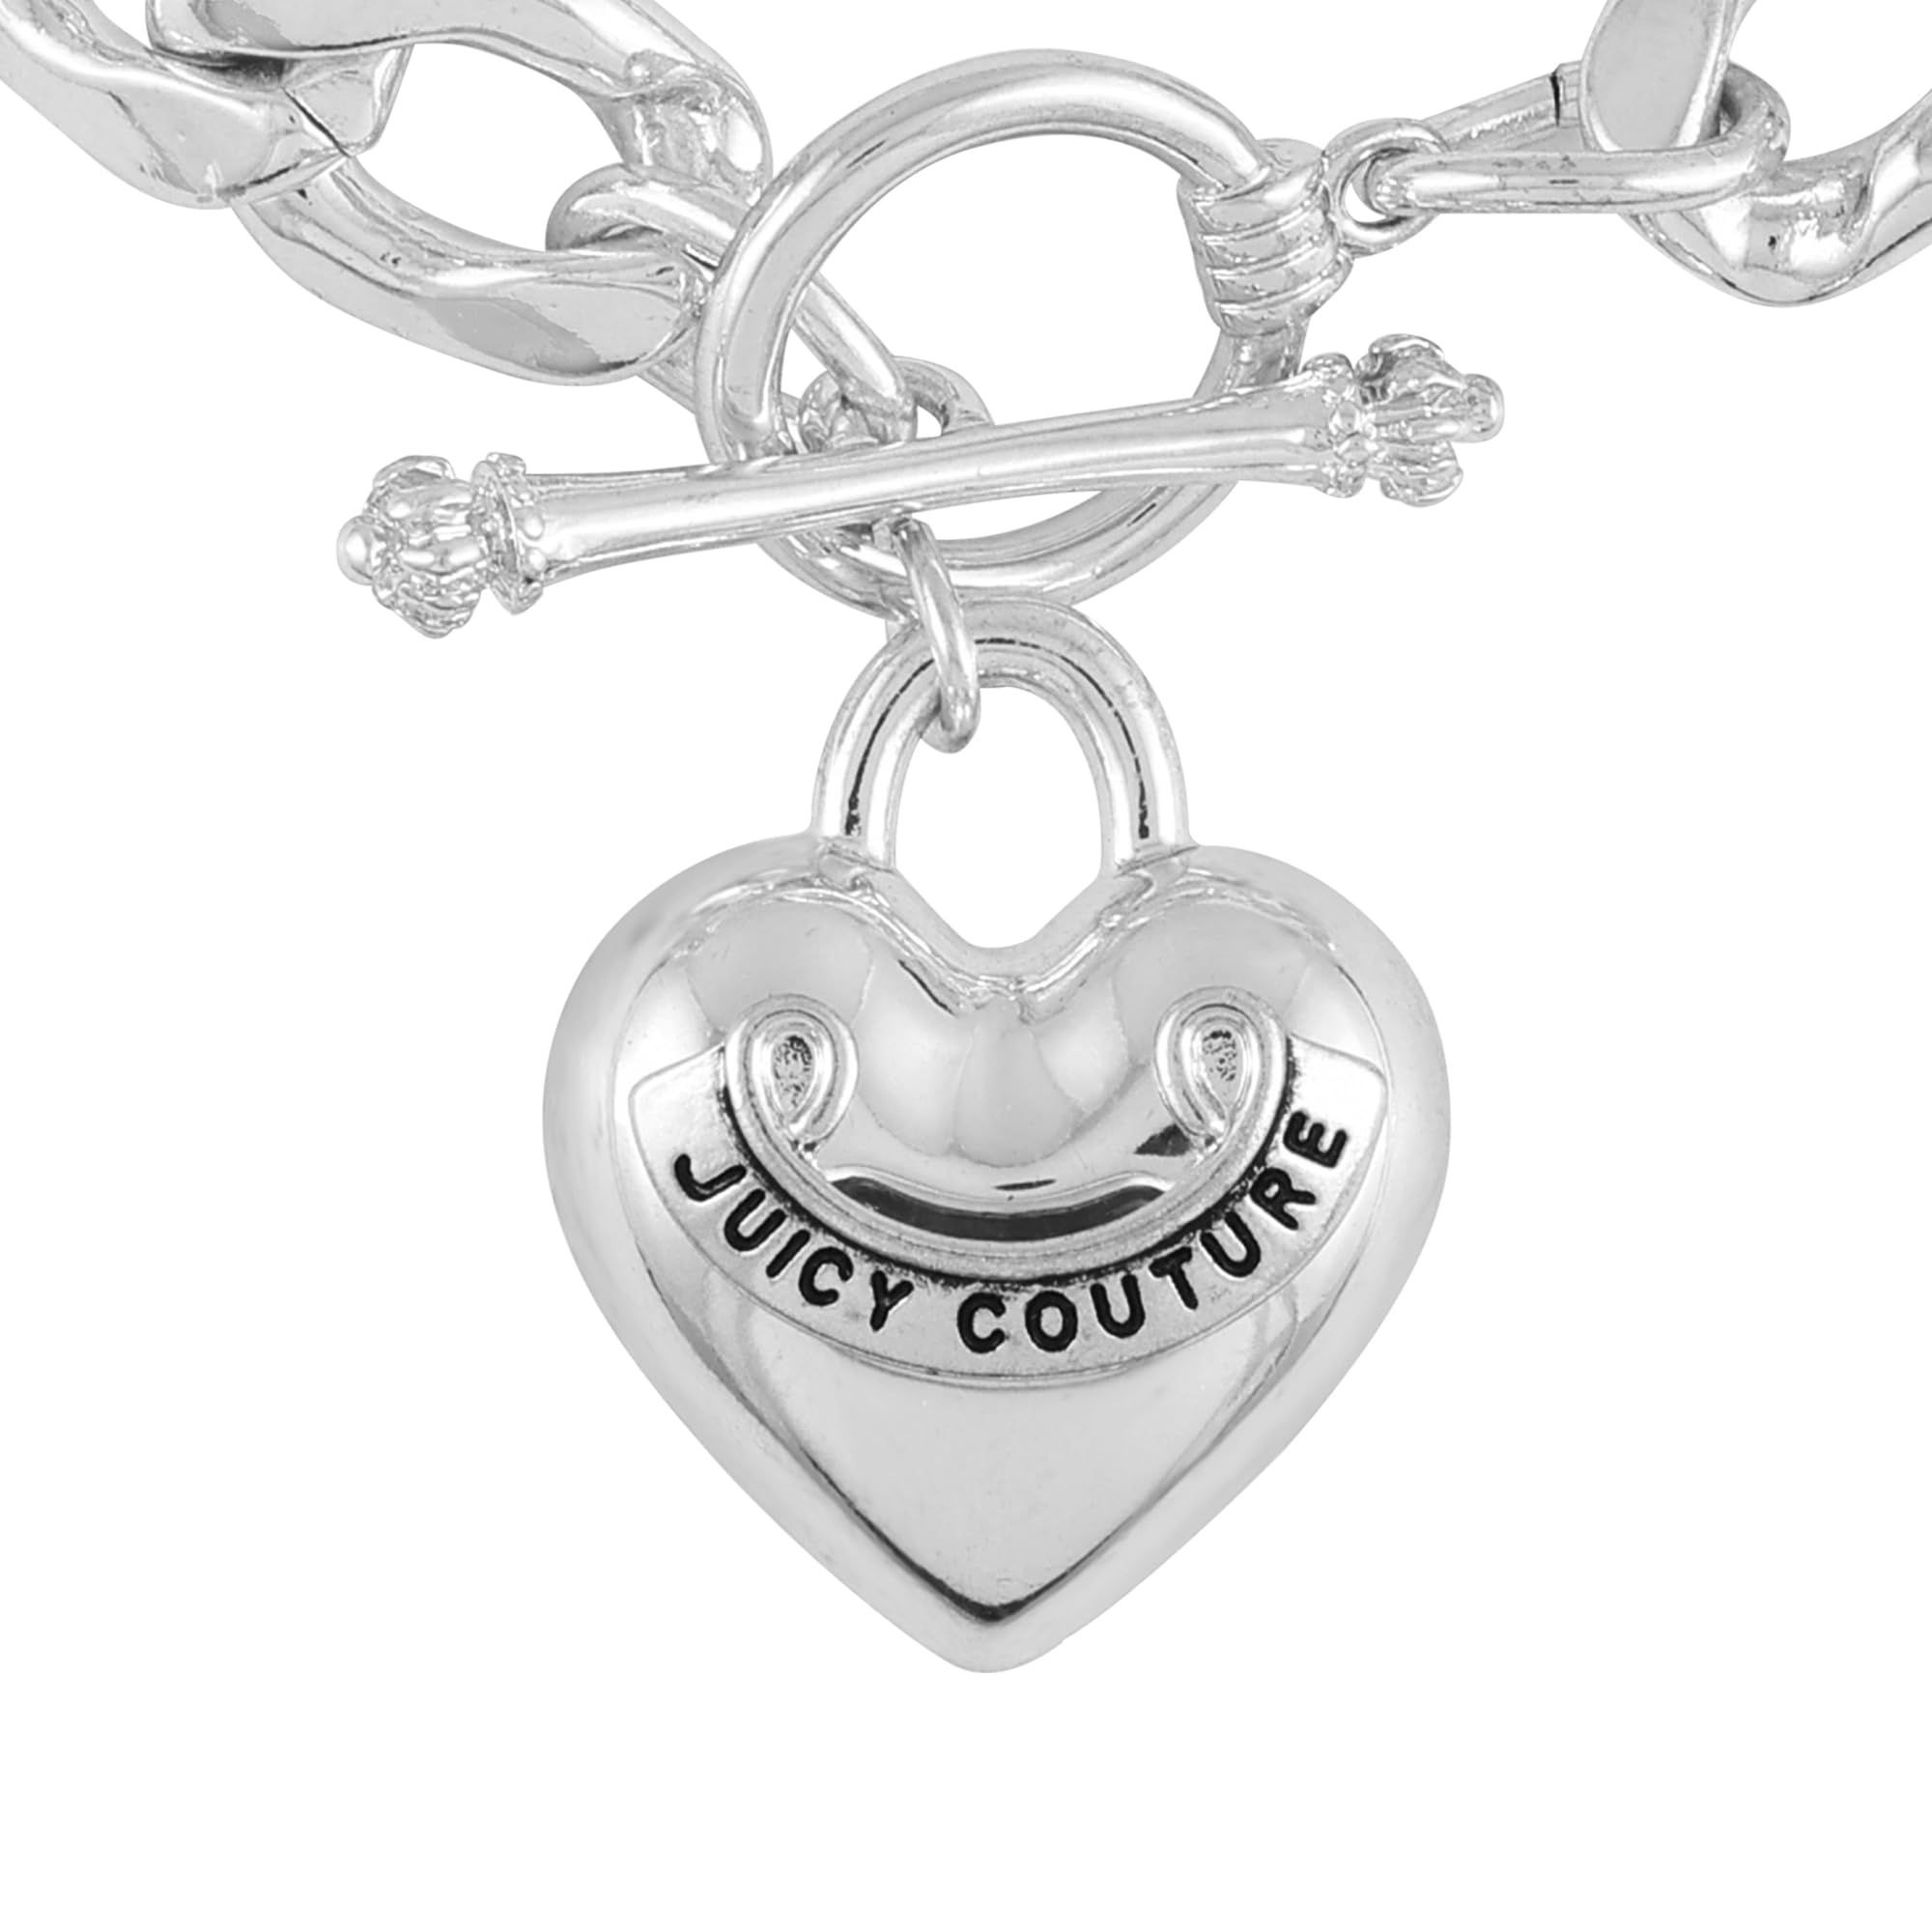 Juicy Couture Silvertone Heart Charm Toggle Bracelet